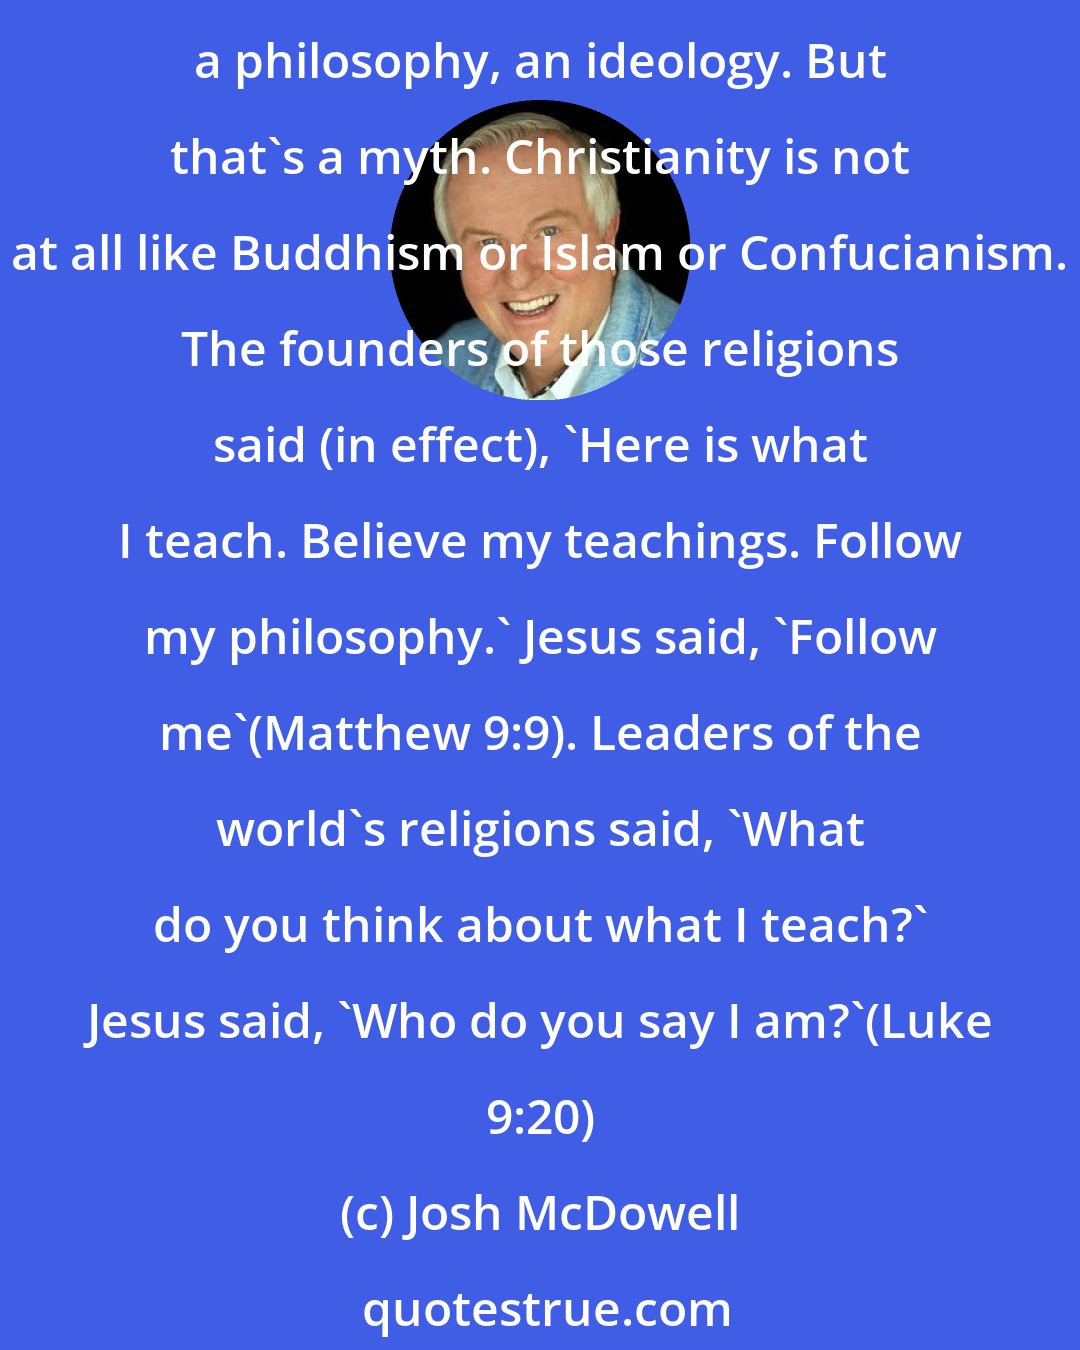 Josh McDowell: Many people entertain the idea that Christianity,like almost any other religion,is basically a system of beliefs-you know, a set of doctrines or a code of behavior, a philosophy, an ideology. But that's a myth. Christianity is not at all like Buddhism or Islam or Confucianism. The founders of those religions said (in effect), 'Here is what I teach. Believe my teachings. Follow my philosophy.' Jesus said, 'Follow me'(Matthew 9:9). Leaders of the world's religions said, 'What do you think about what I teach?' Jesus said, 'Who do you say I am?'(Luke 9:20)